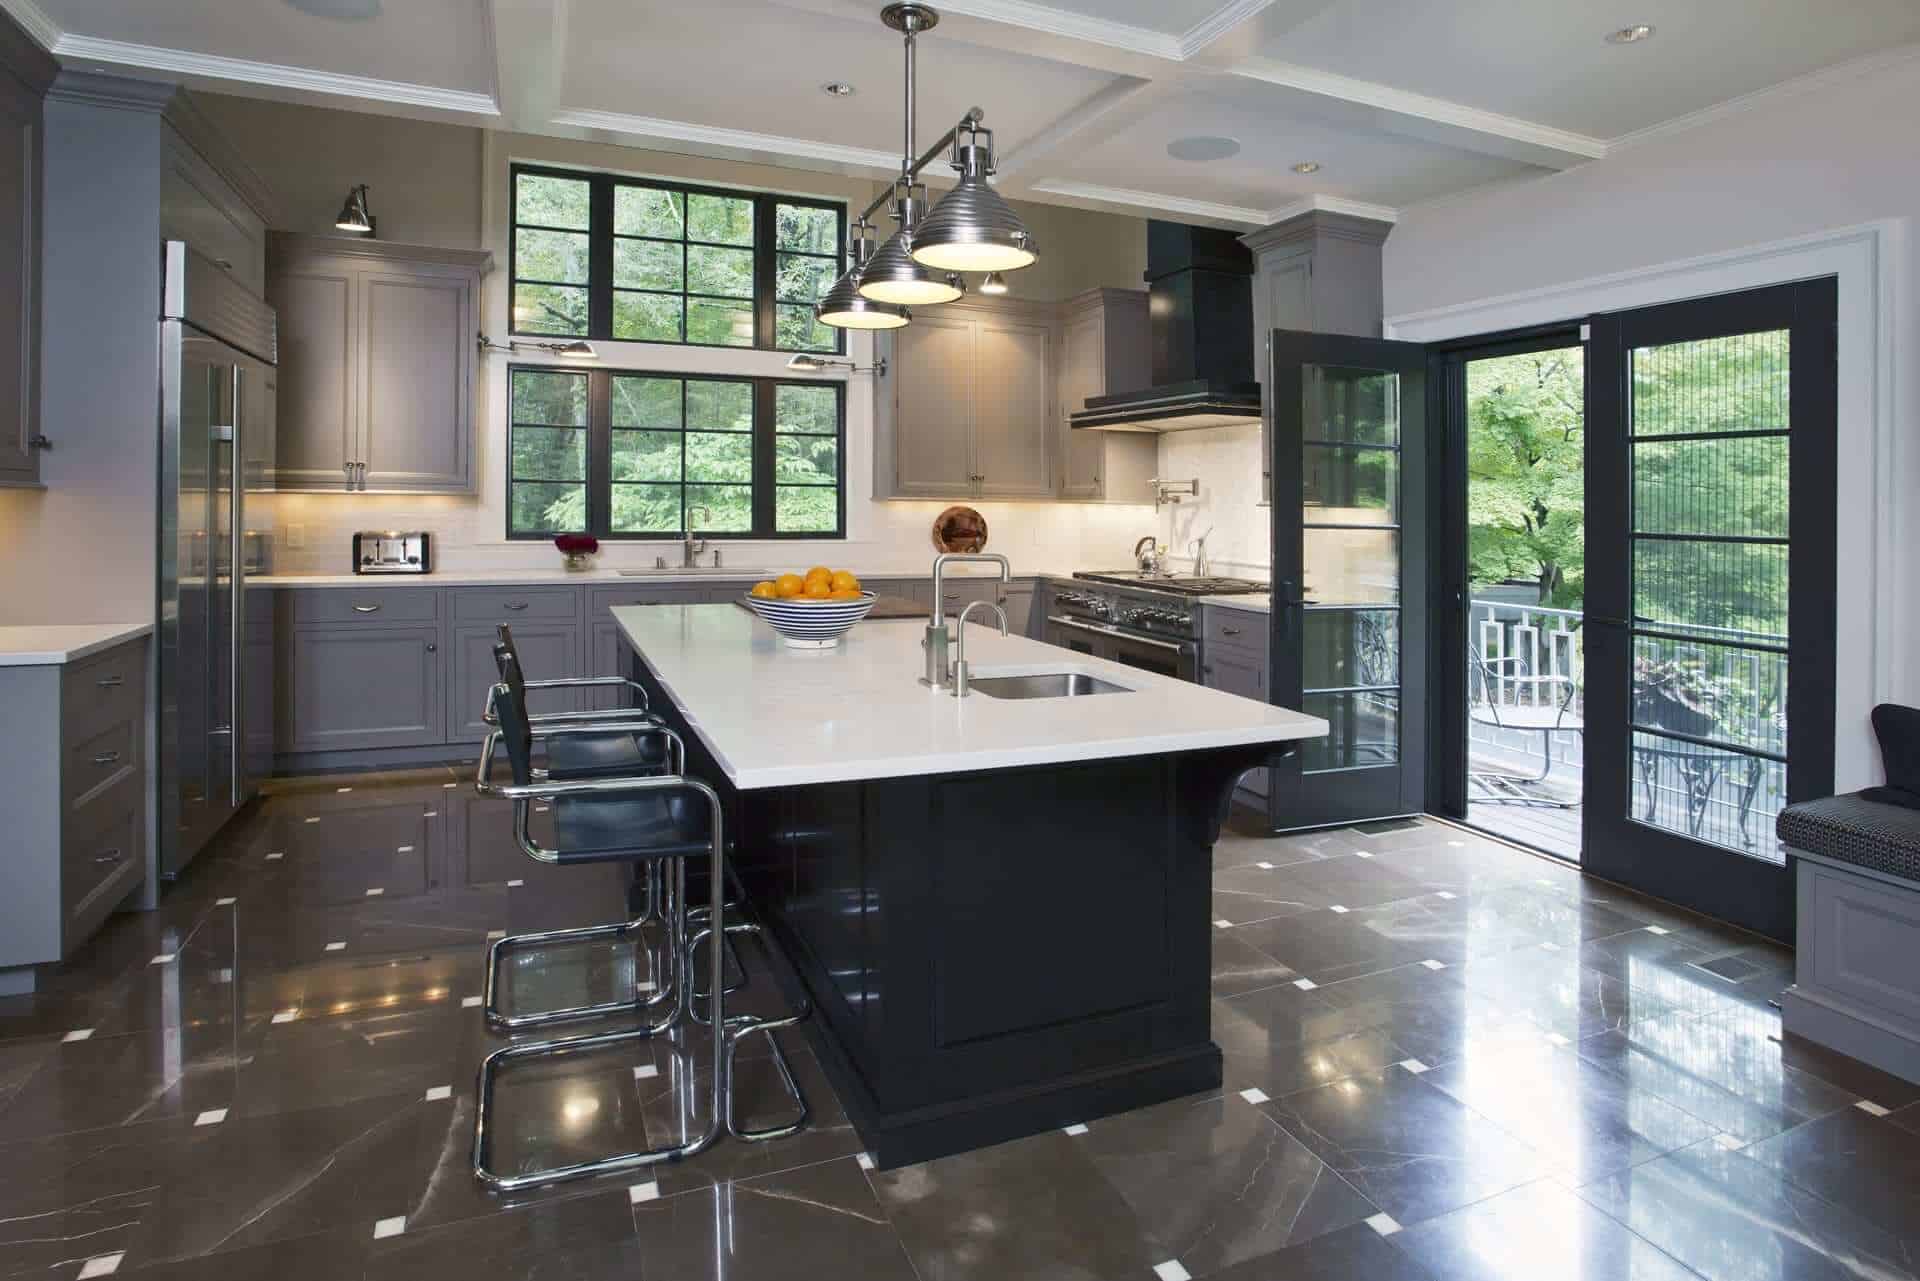 Kitchen in Yorktown NY features Bilotta gray-painted cabinetry, large center island and custom Rangecraft madison hood with dark antique steel finish.